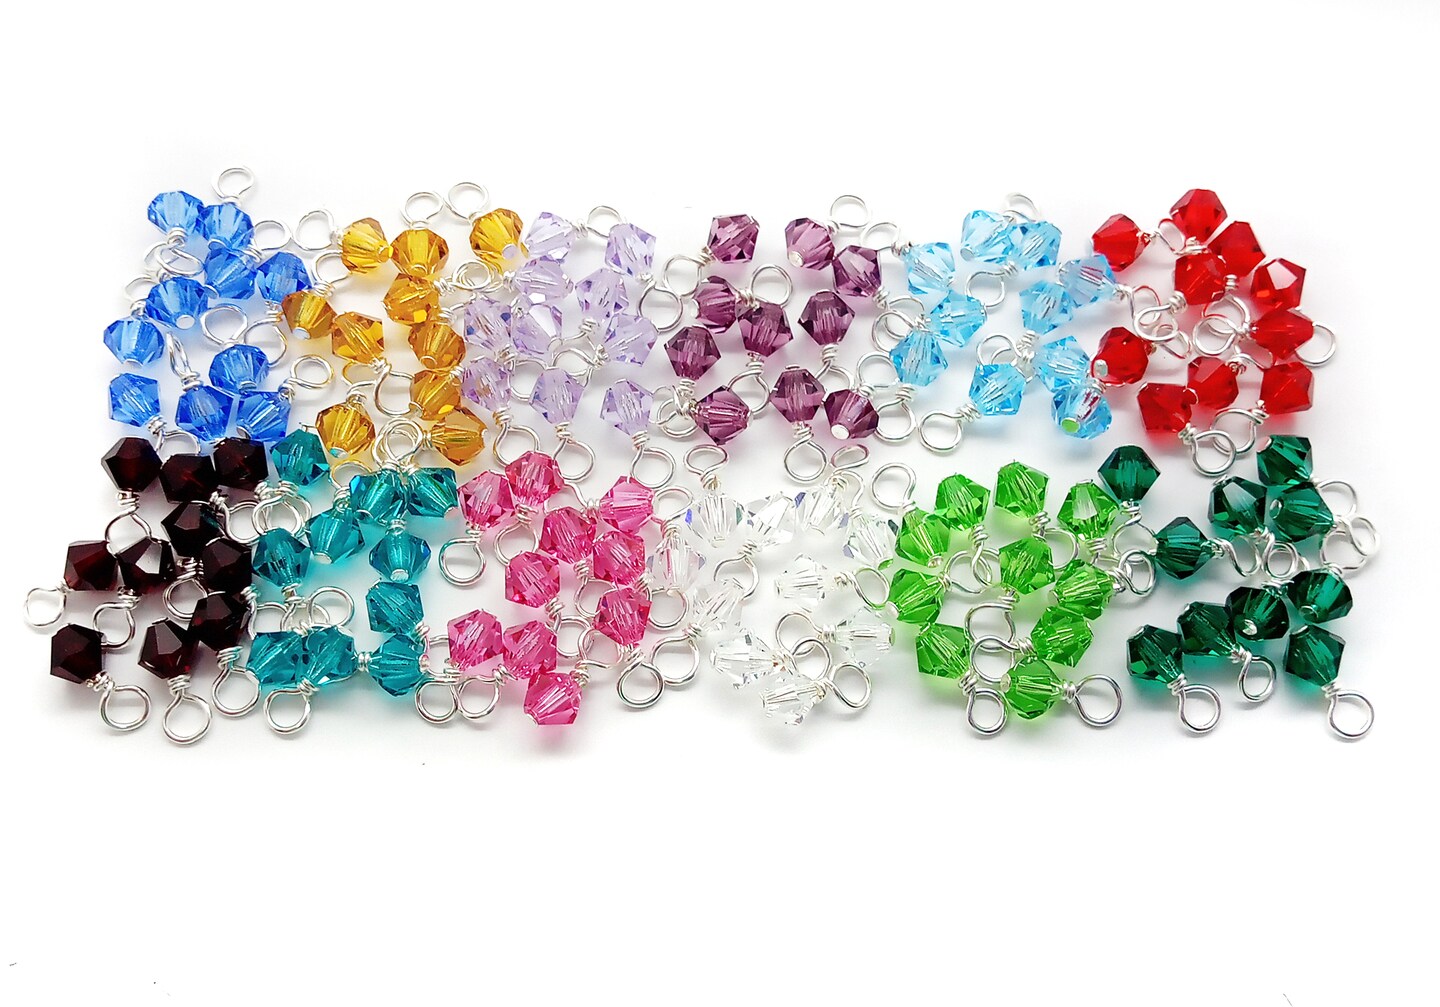 Tiny Crystal Bead Dangles, 10 pc, 4mm Birthstone Charms with Silver- or Gold-Plated Wire, Adorabilities